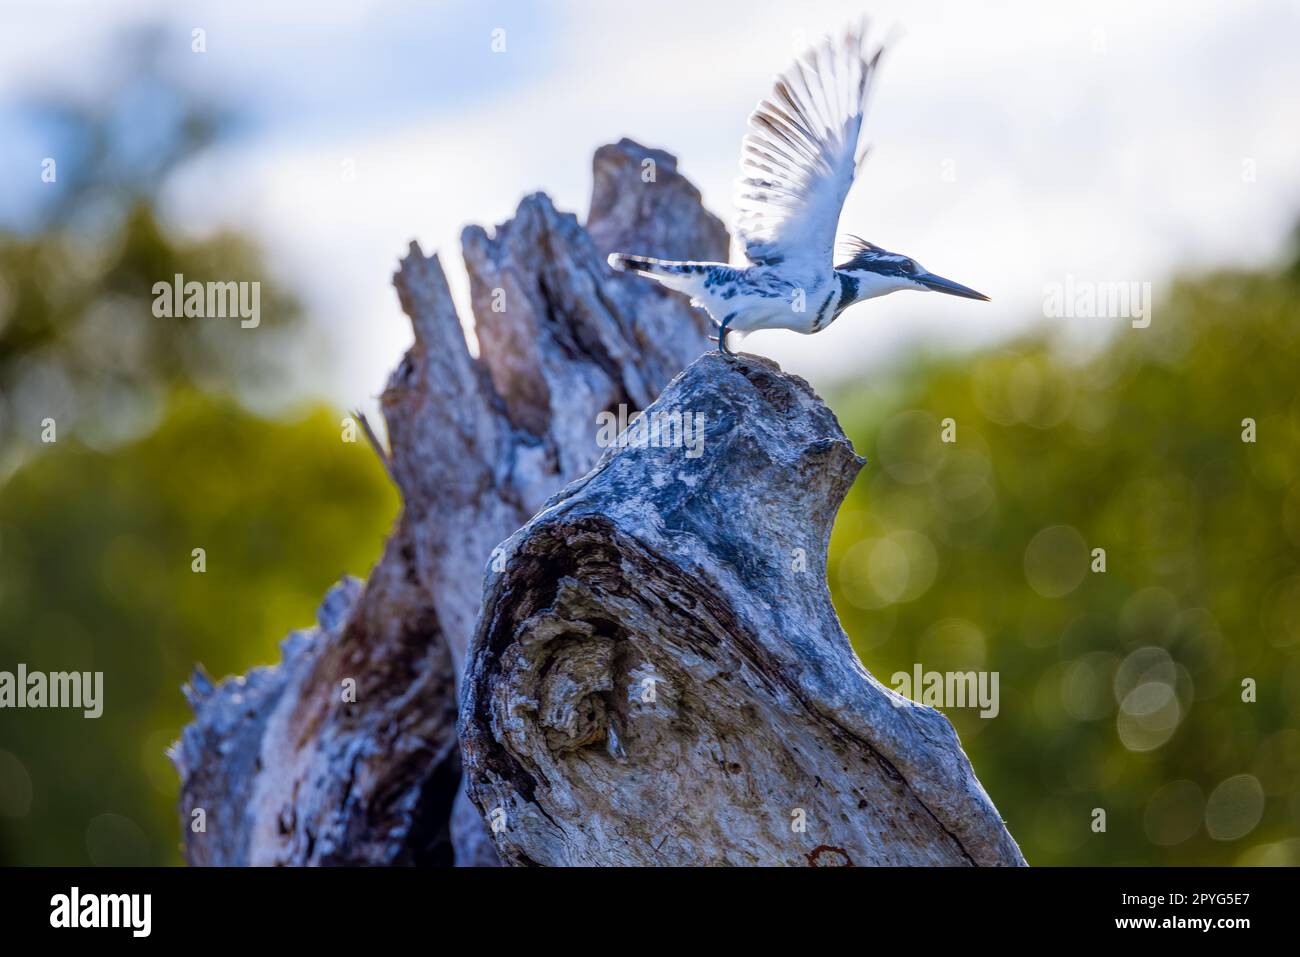 A beautiful pied kingfisher bird poised to take off from an old tree trunk, ready to soar over the Kenyan landscape Stock Photo